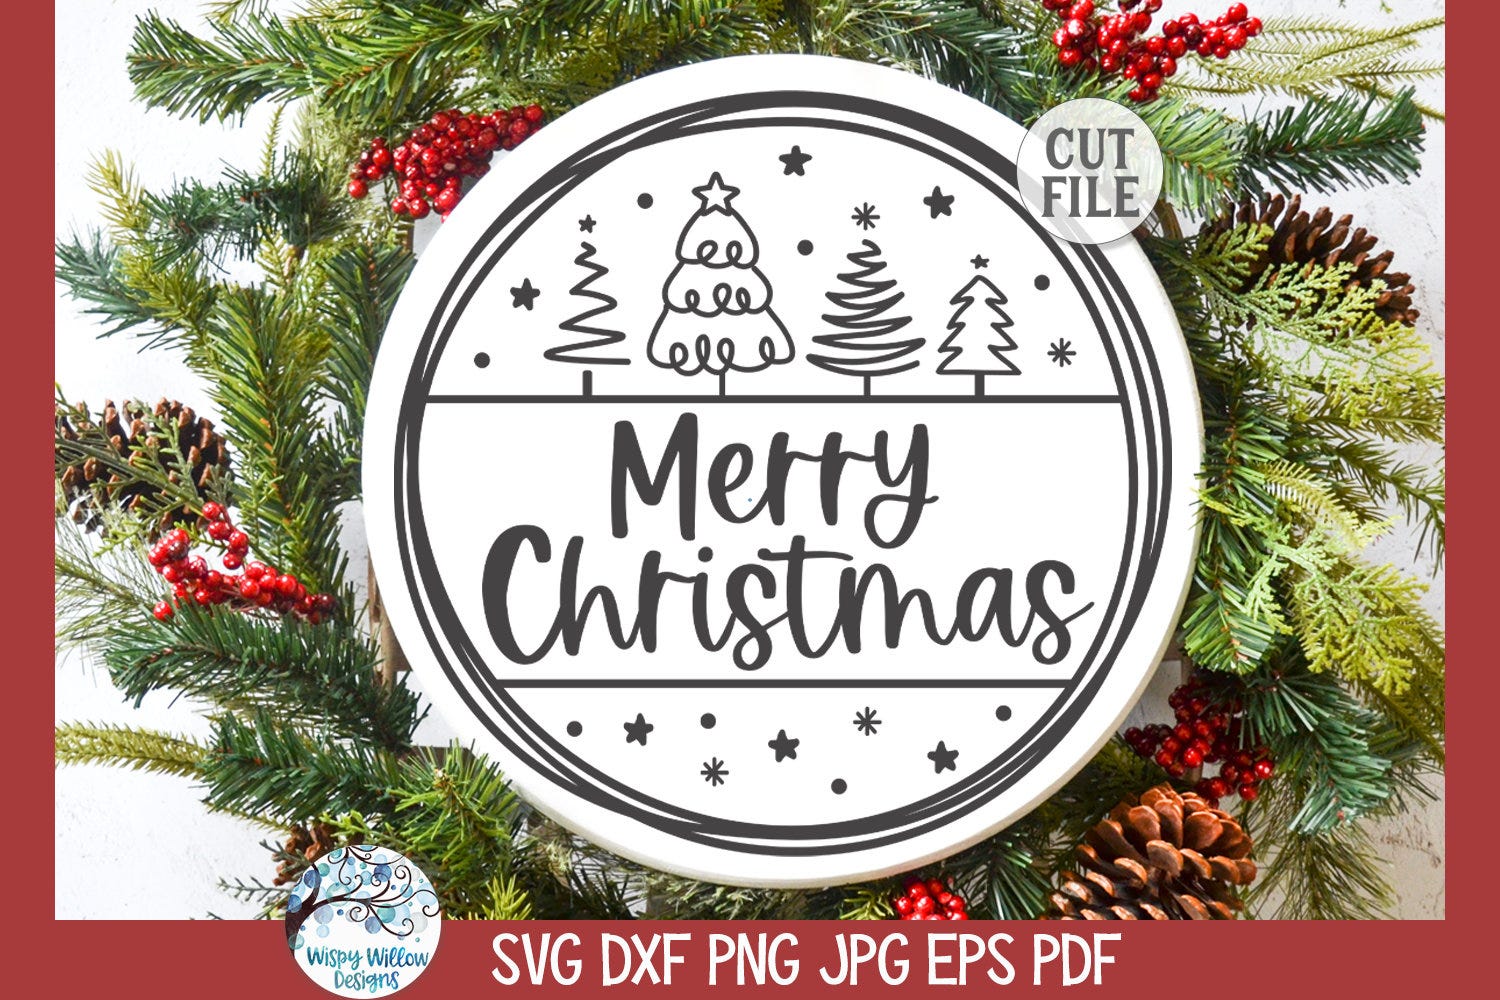 Merry Christmas Round Sign SVG for Cricut, Christmas Tree Round Farmhouse Sign, Winter Holiday Welcome Door Hanger, Vinyl Cut File Download